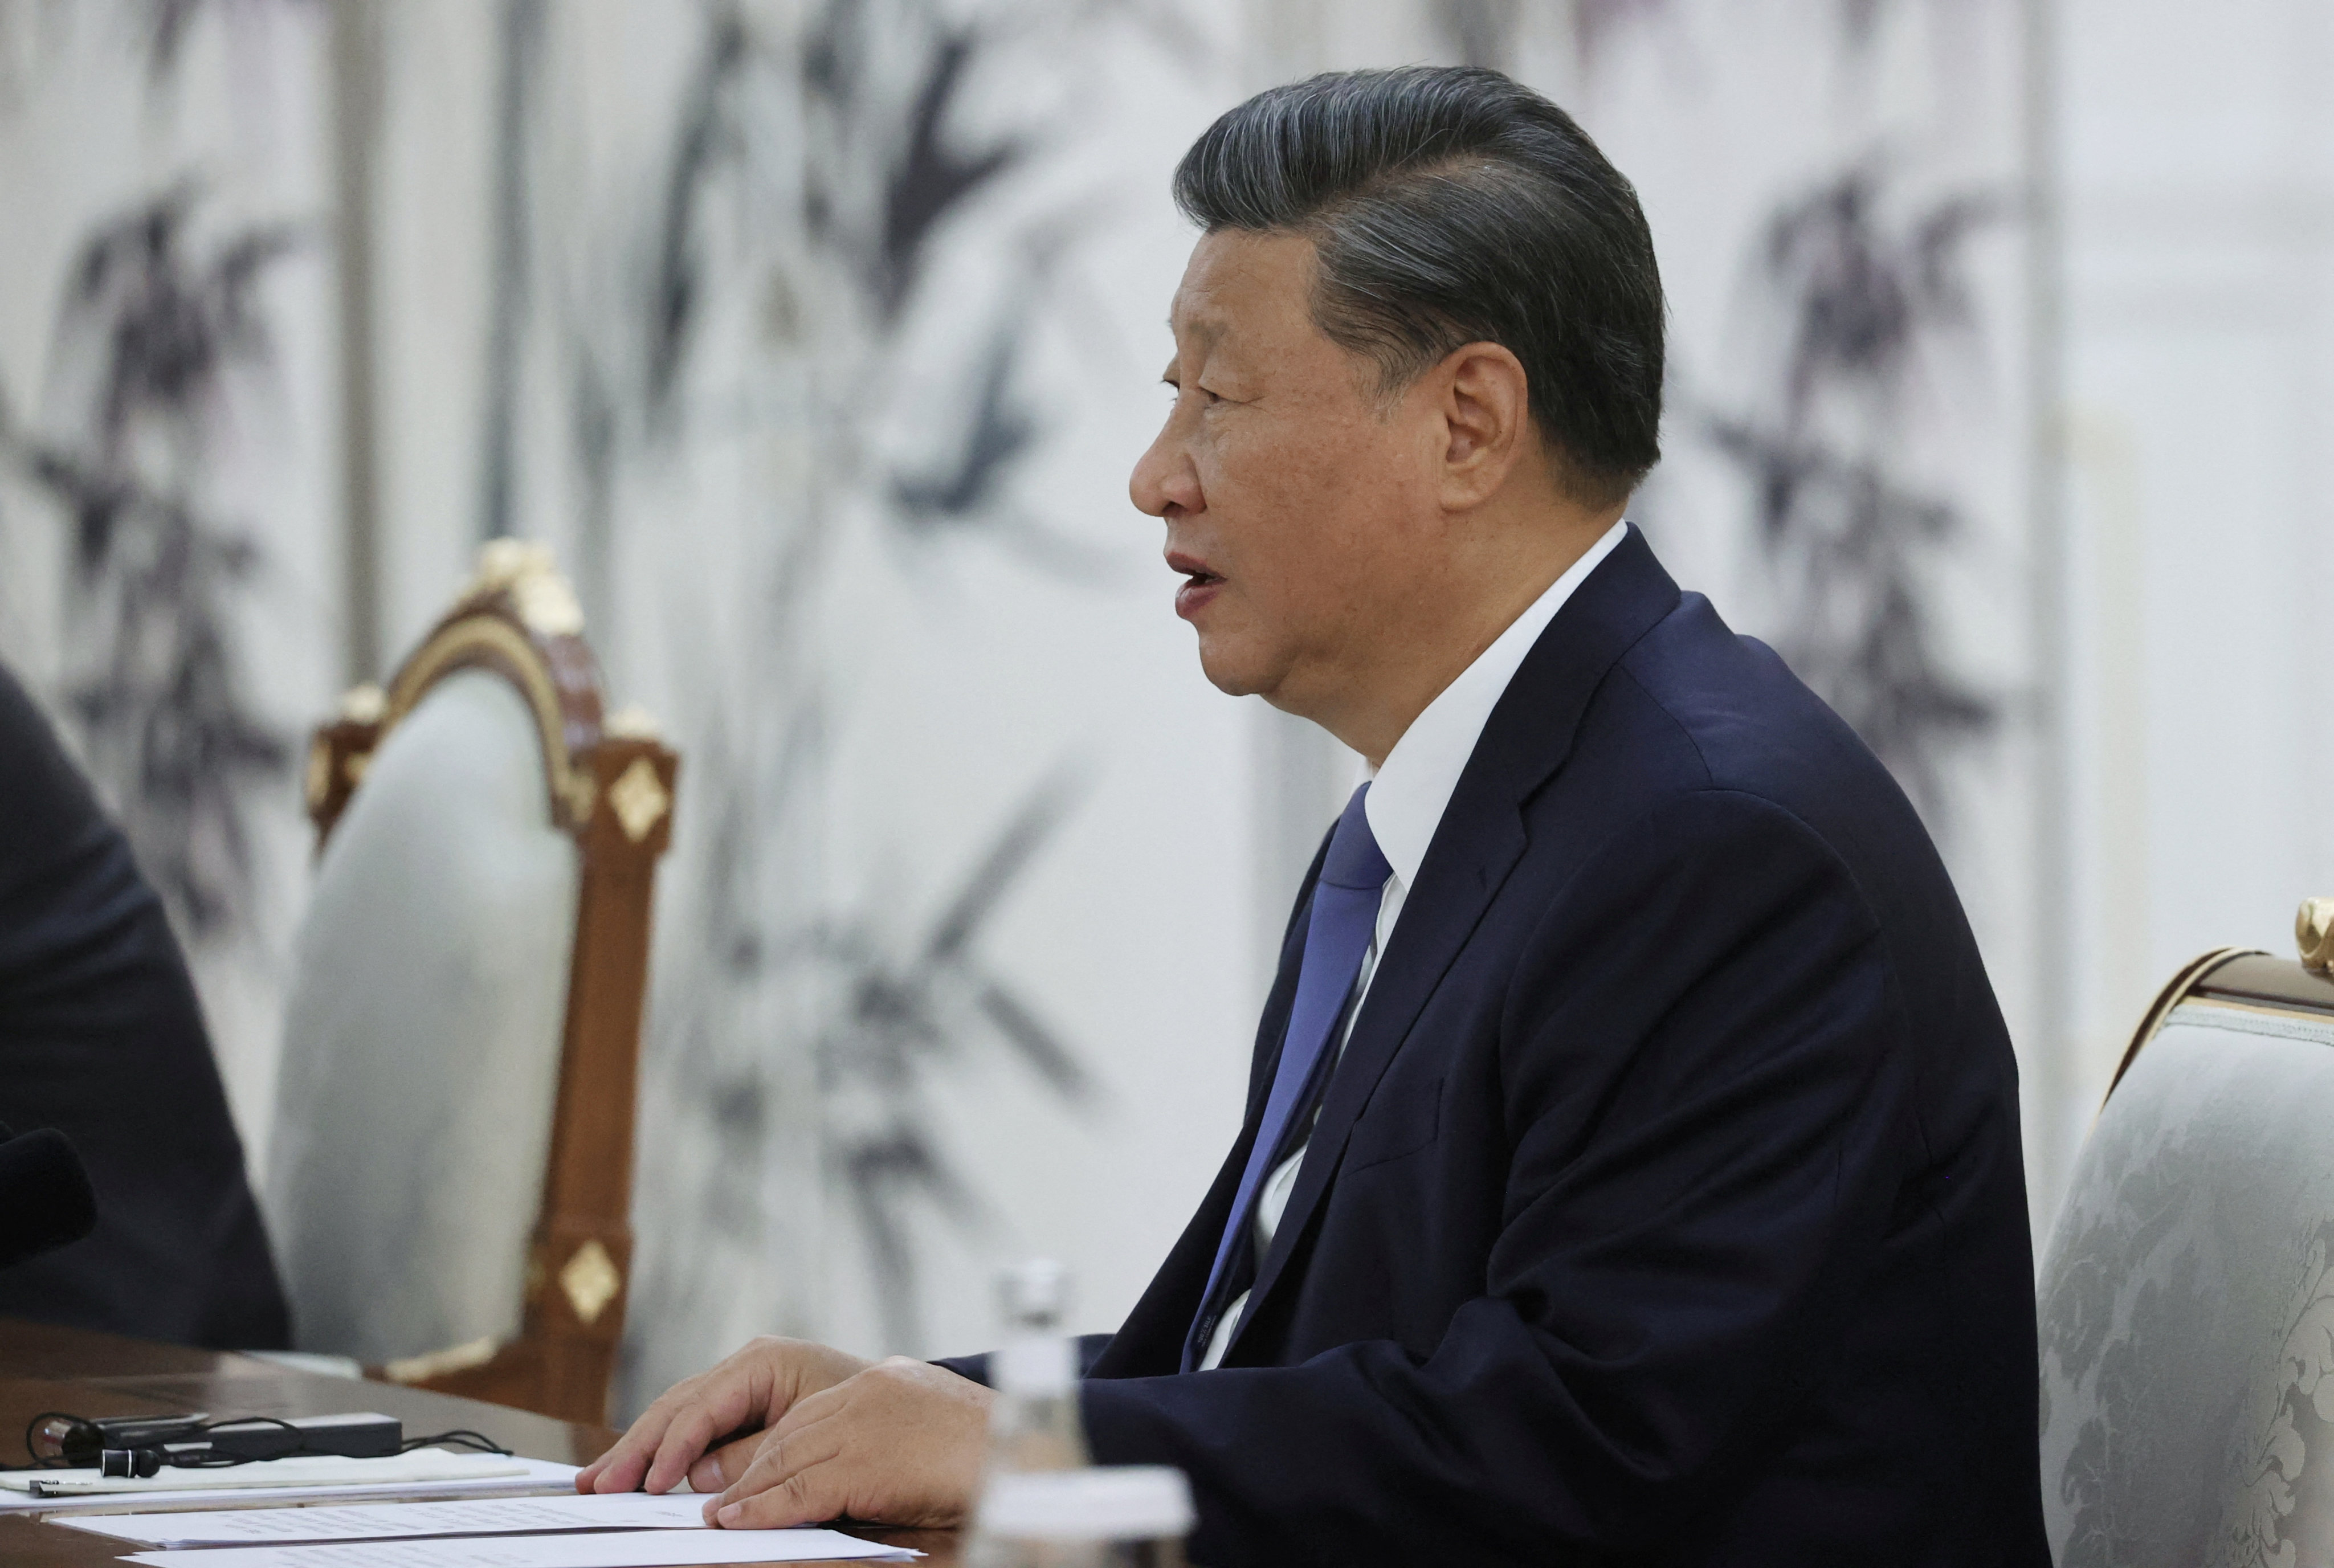 Xi Jinping and Vladimir Putin speak in person for first time since Russia invaded Ukraine | South China Morning Post